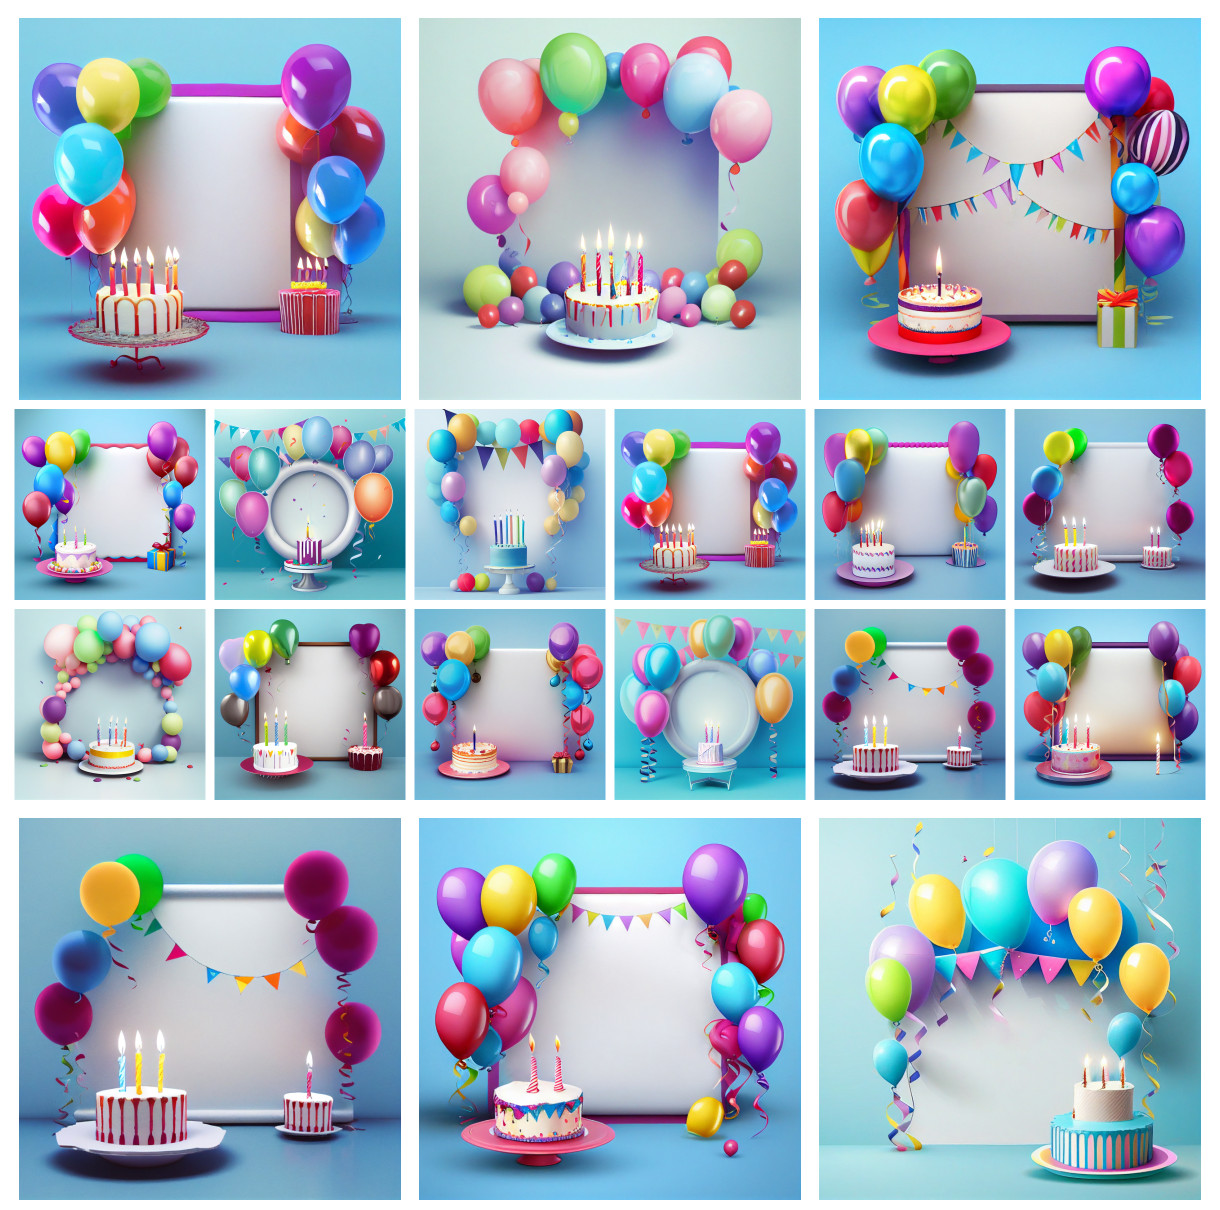 Introducing Unique Happy Birthday Card Backgrounds